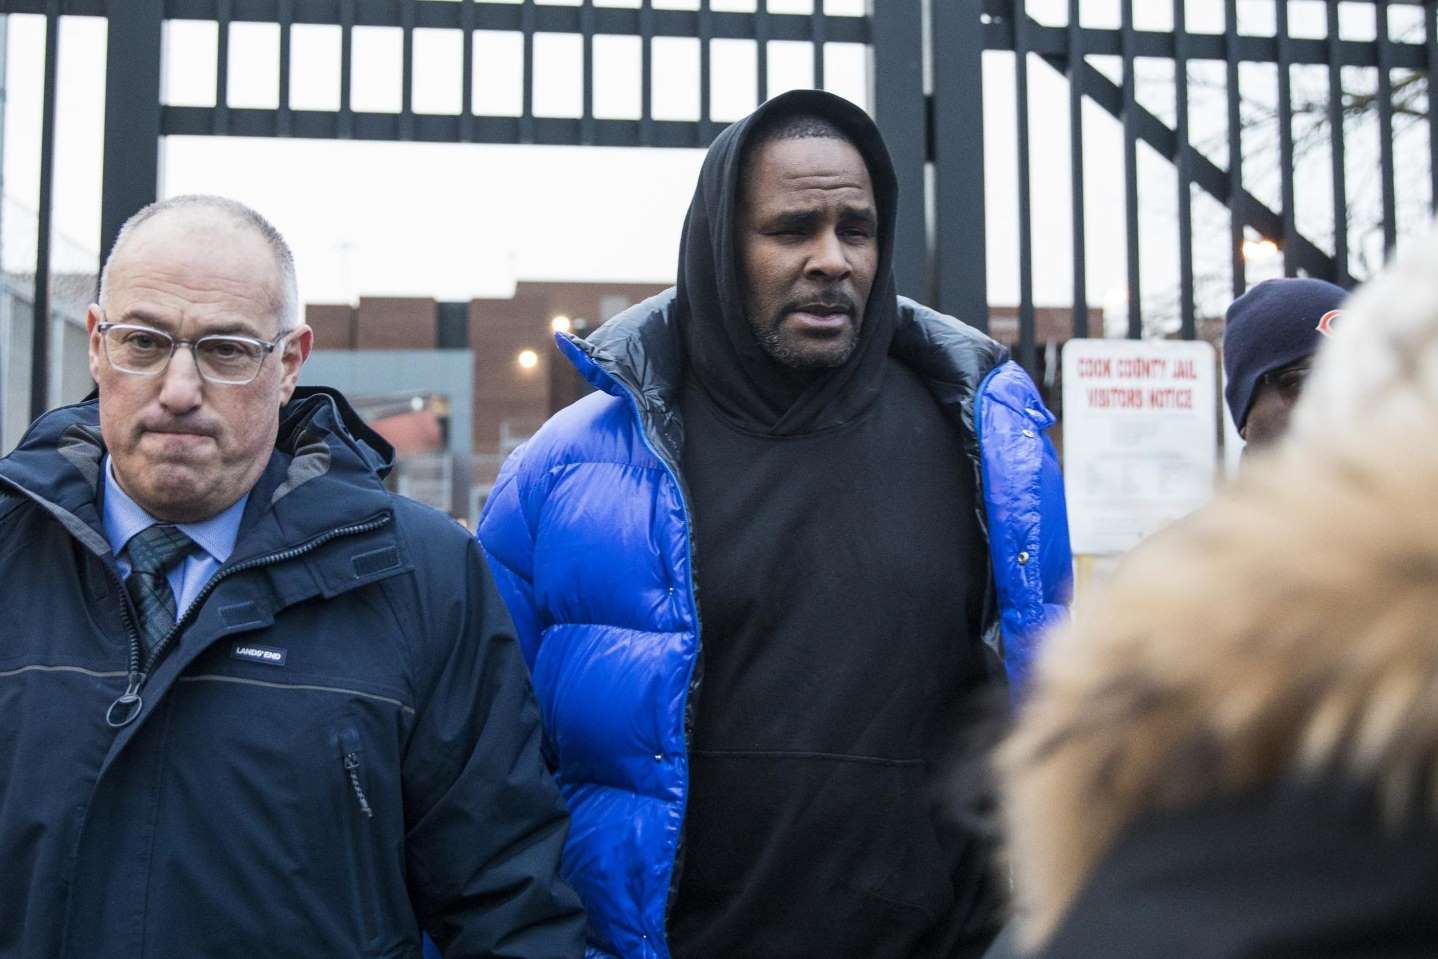 Amid fear of attack, R. Kelly moved from restrictive unit to general prison